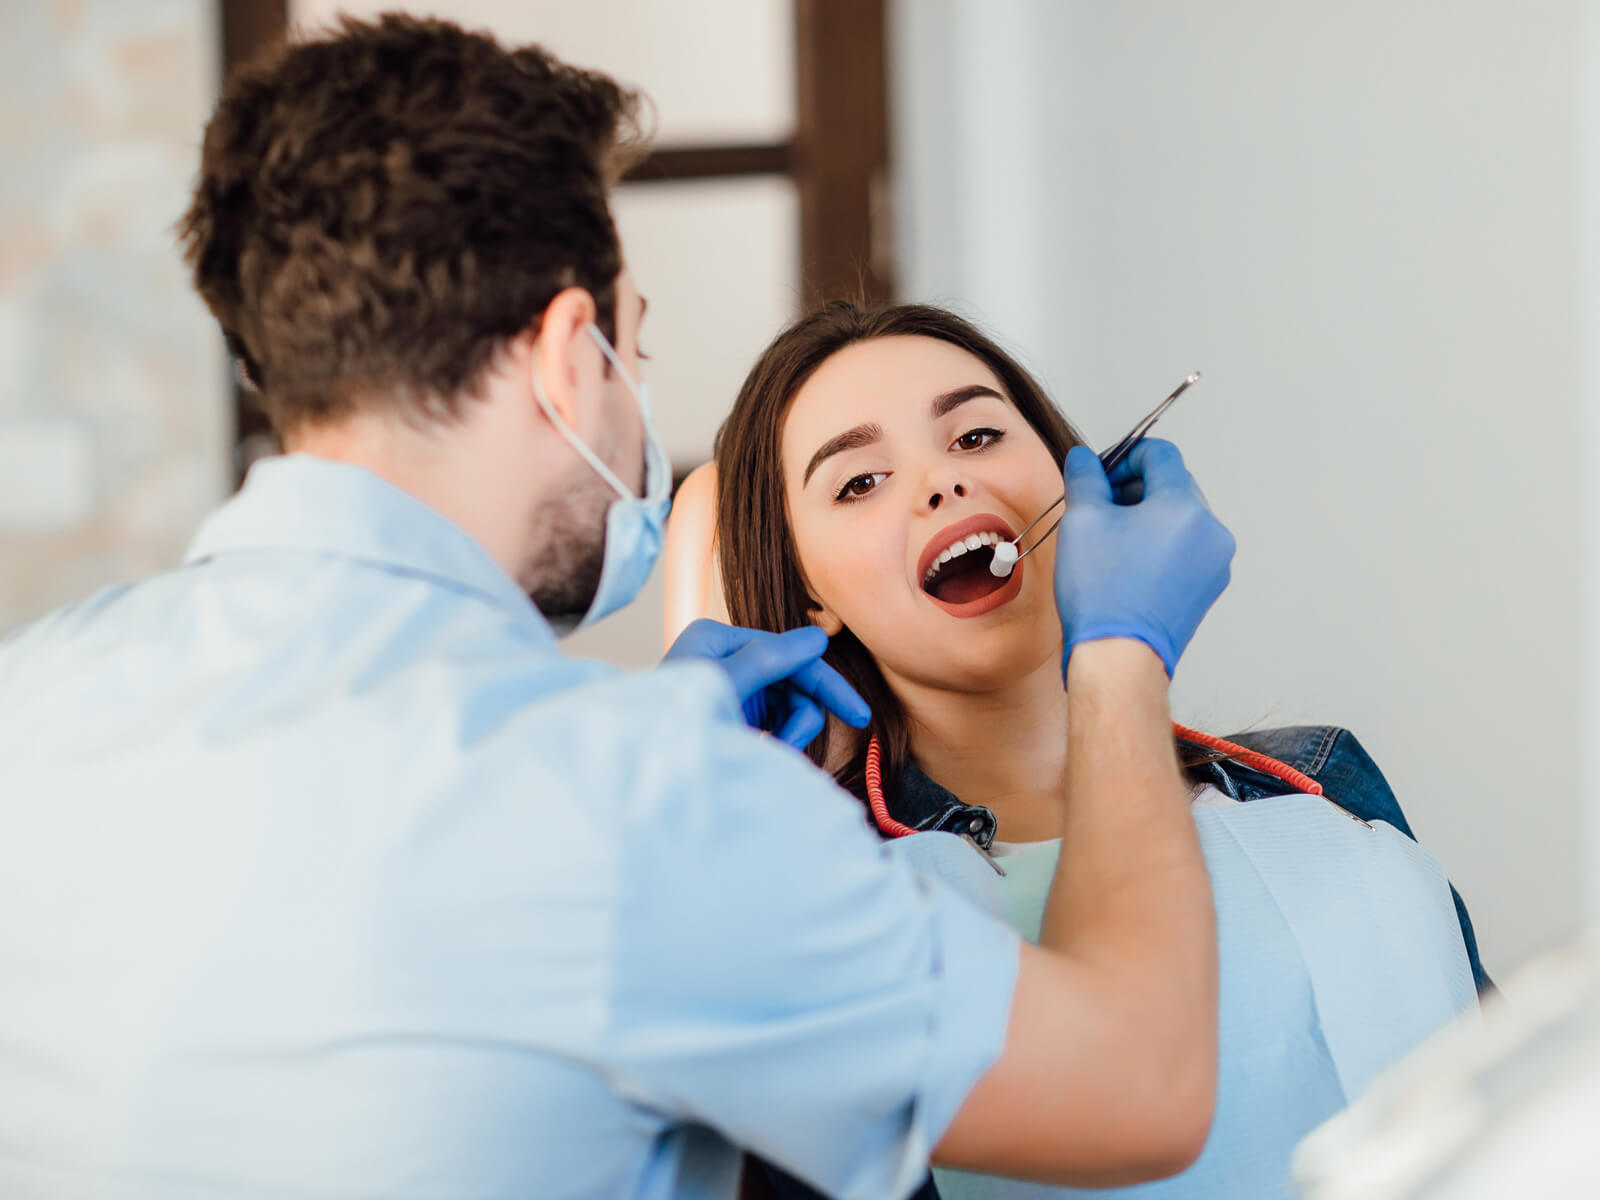 What are the benefits of dental care that you cannot skip?